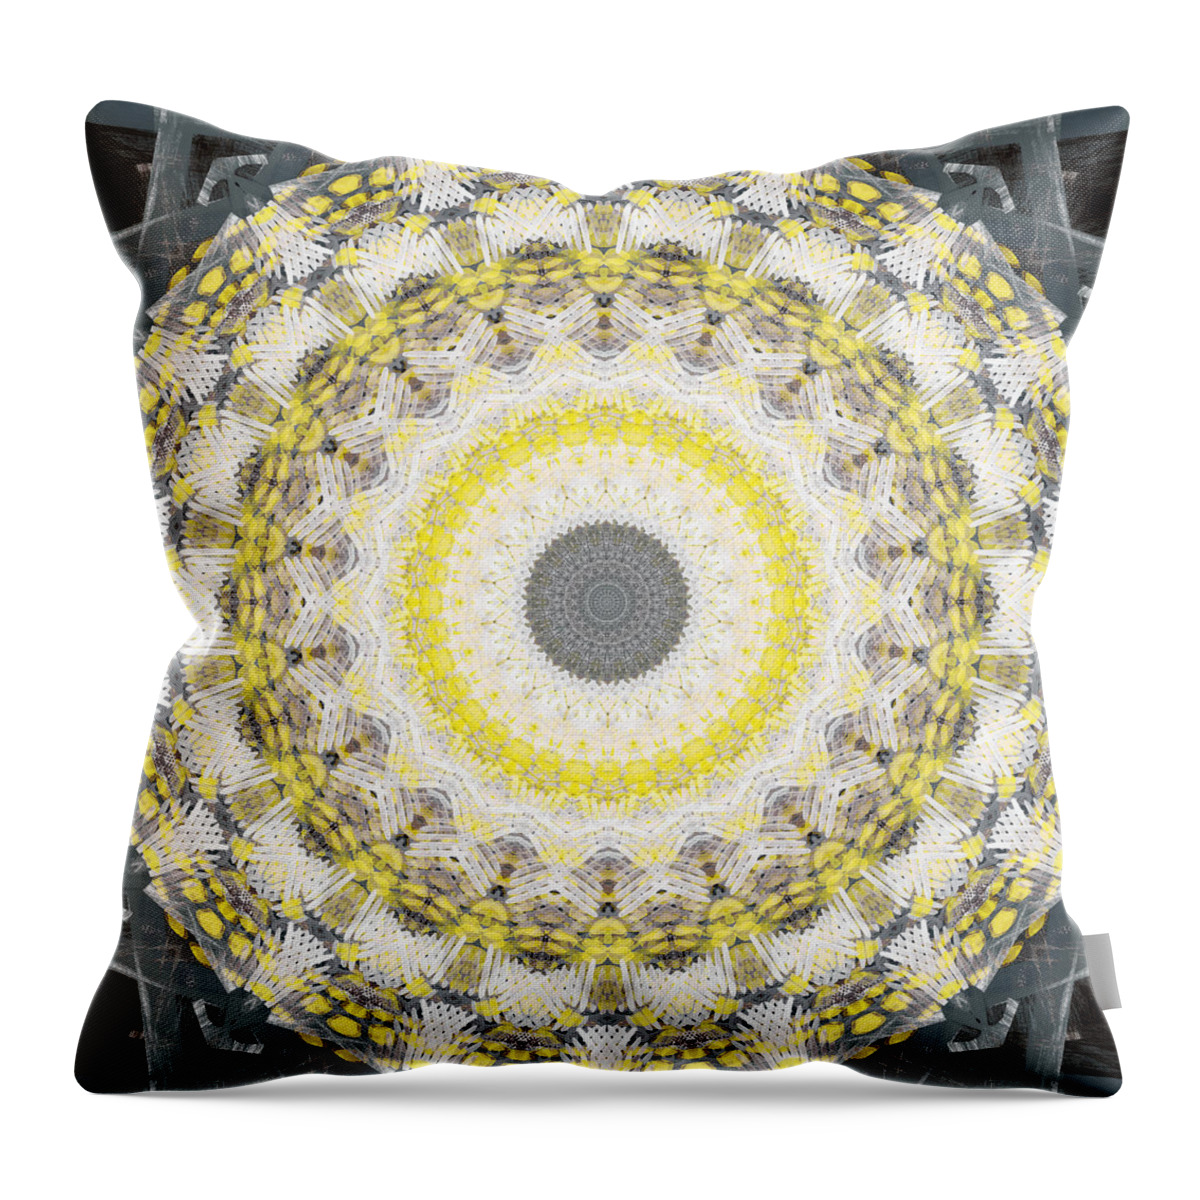 Concrete Throw Pillow featuring the painting Concrete and Yellow Mandala- Abstract Art by Linda Woods by Linda Woods